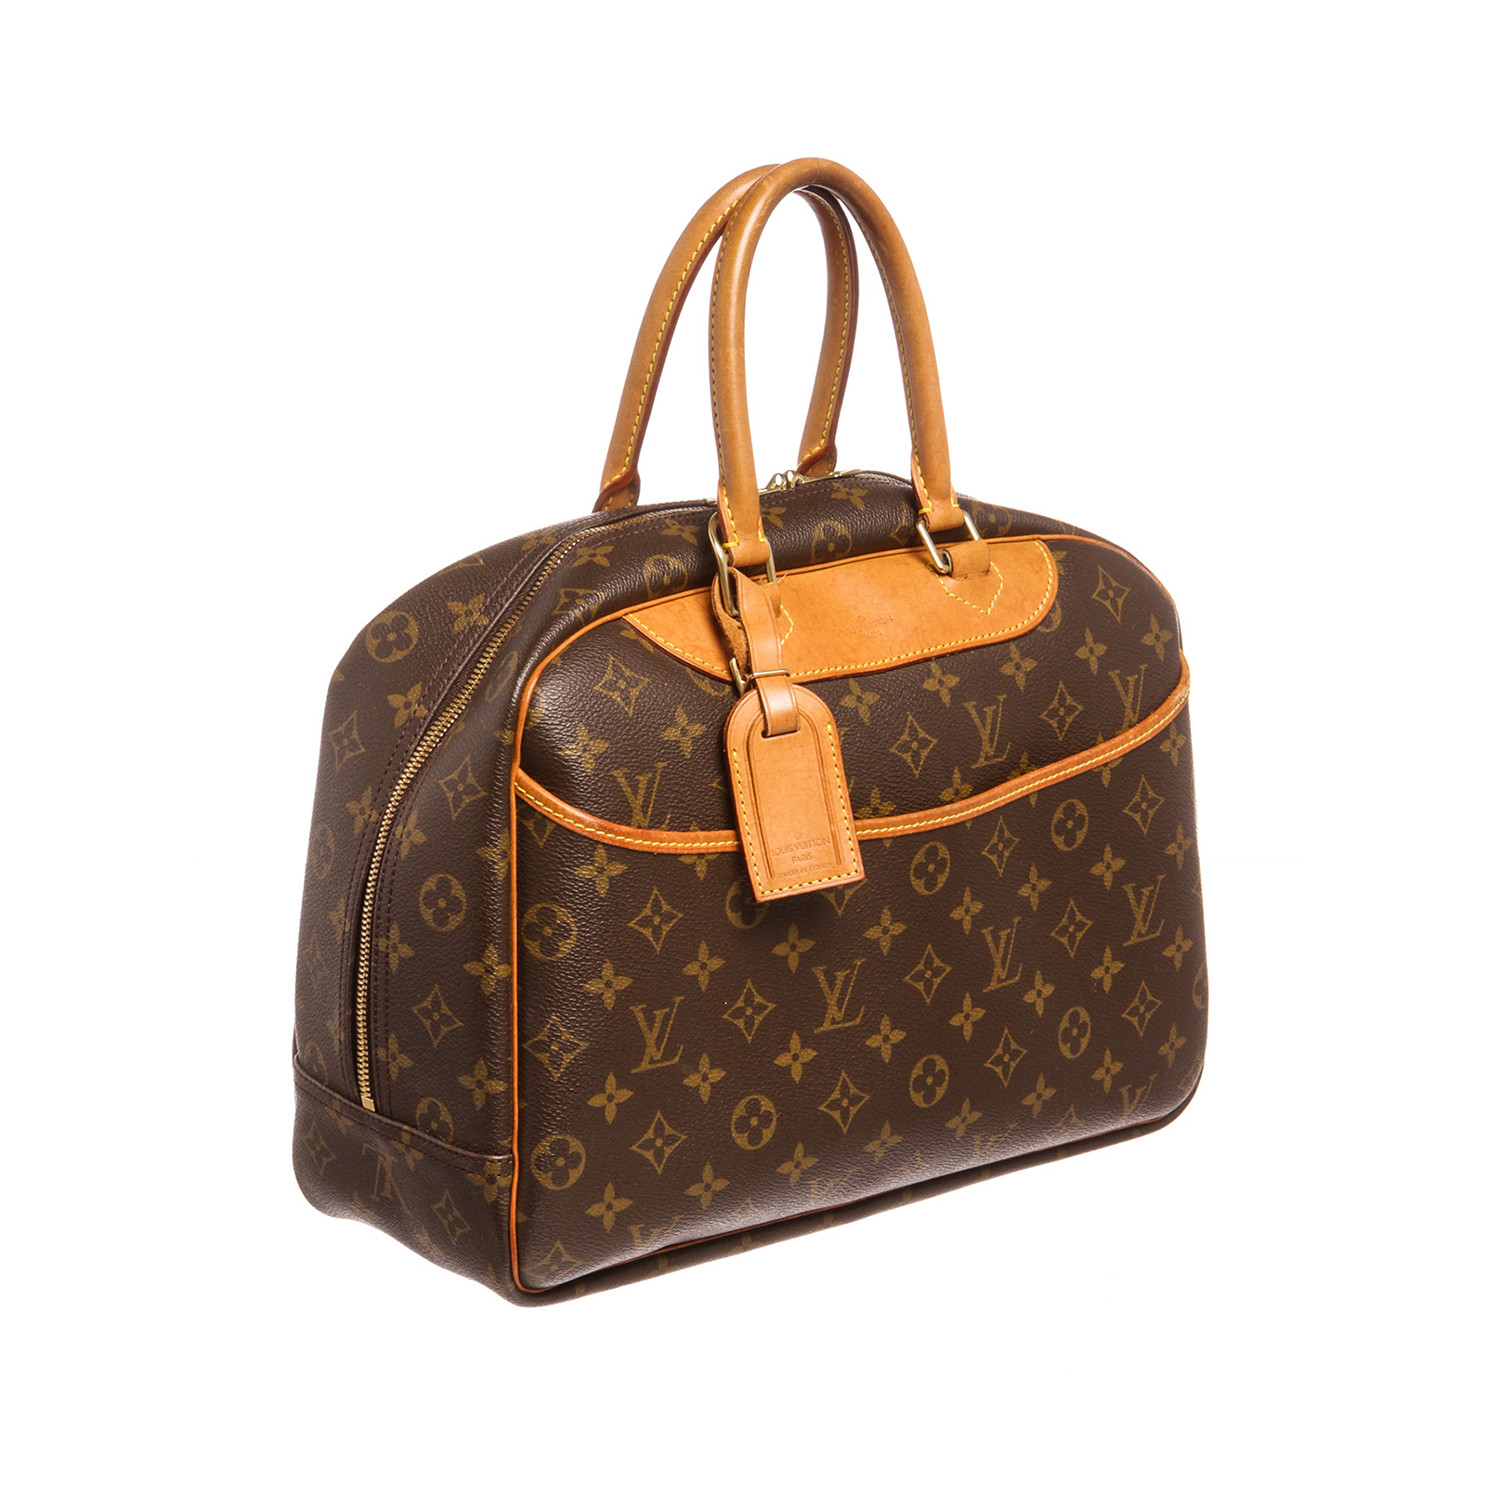 Monogram Canvas Leather Deauville Doctor Bag // MB0989 // Pre-Owned ...